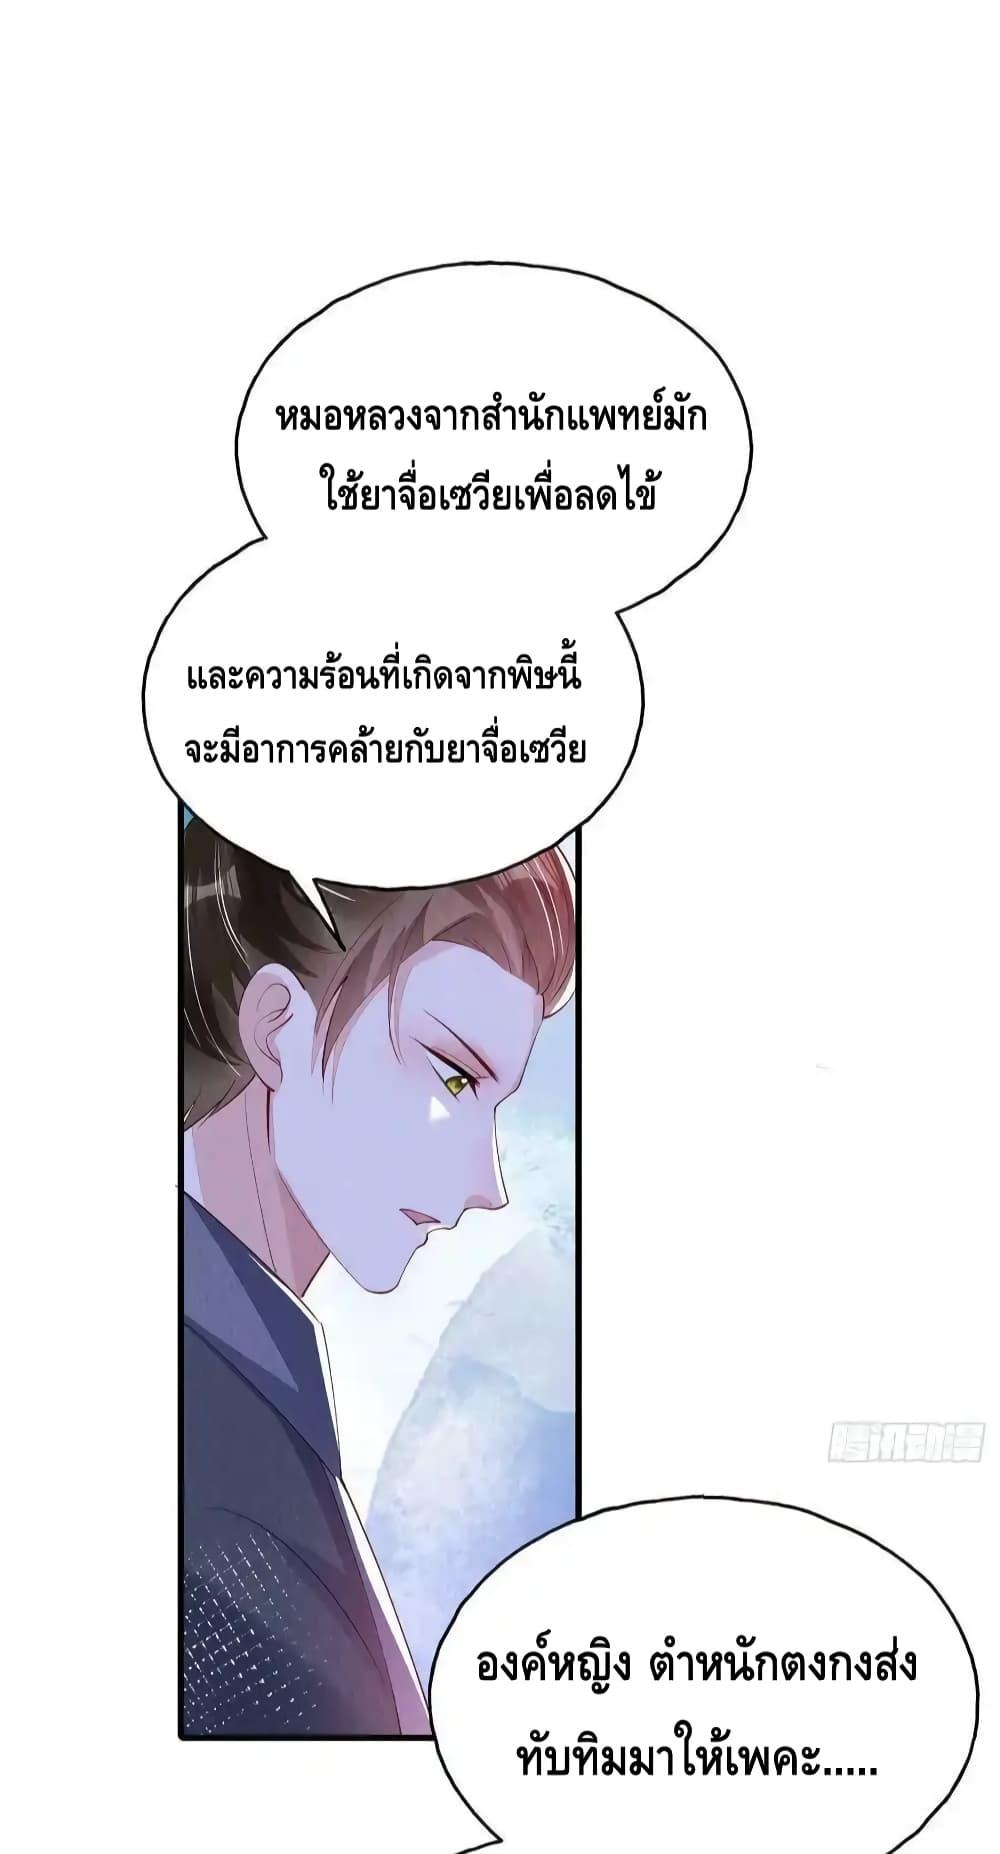 After I Bloom, a Hundred Flowers ตอนที่ 82 (28)